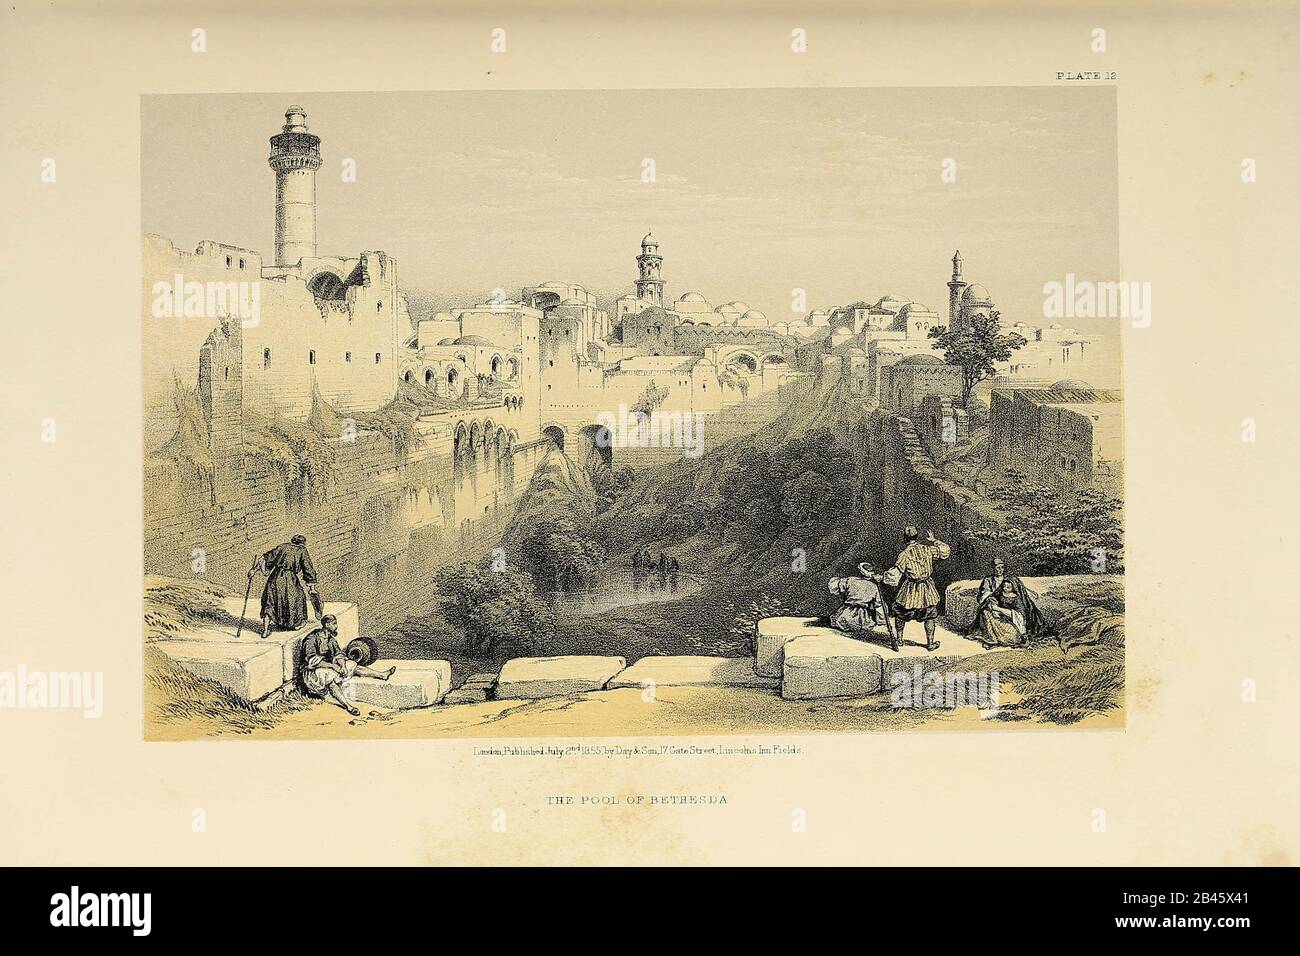 Pool of Bethesda from The Holy Land : Syria, Idumea, Arabia, Egypt & Nubia by Roberts, David, (1796-1864) Engraved by Louis Haghe. Volume 1. Book Published in 1855 by D. Appleton & Co., 346 & 348 Broadway in New York. Stock Photo